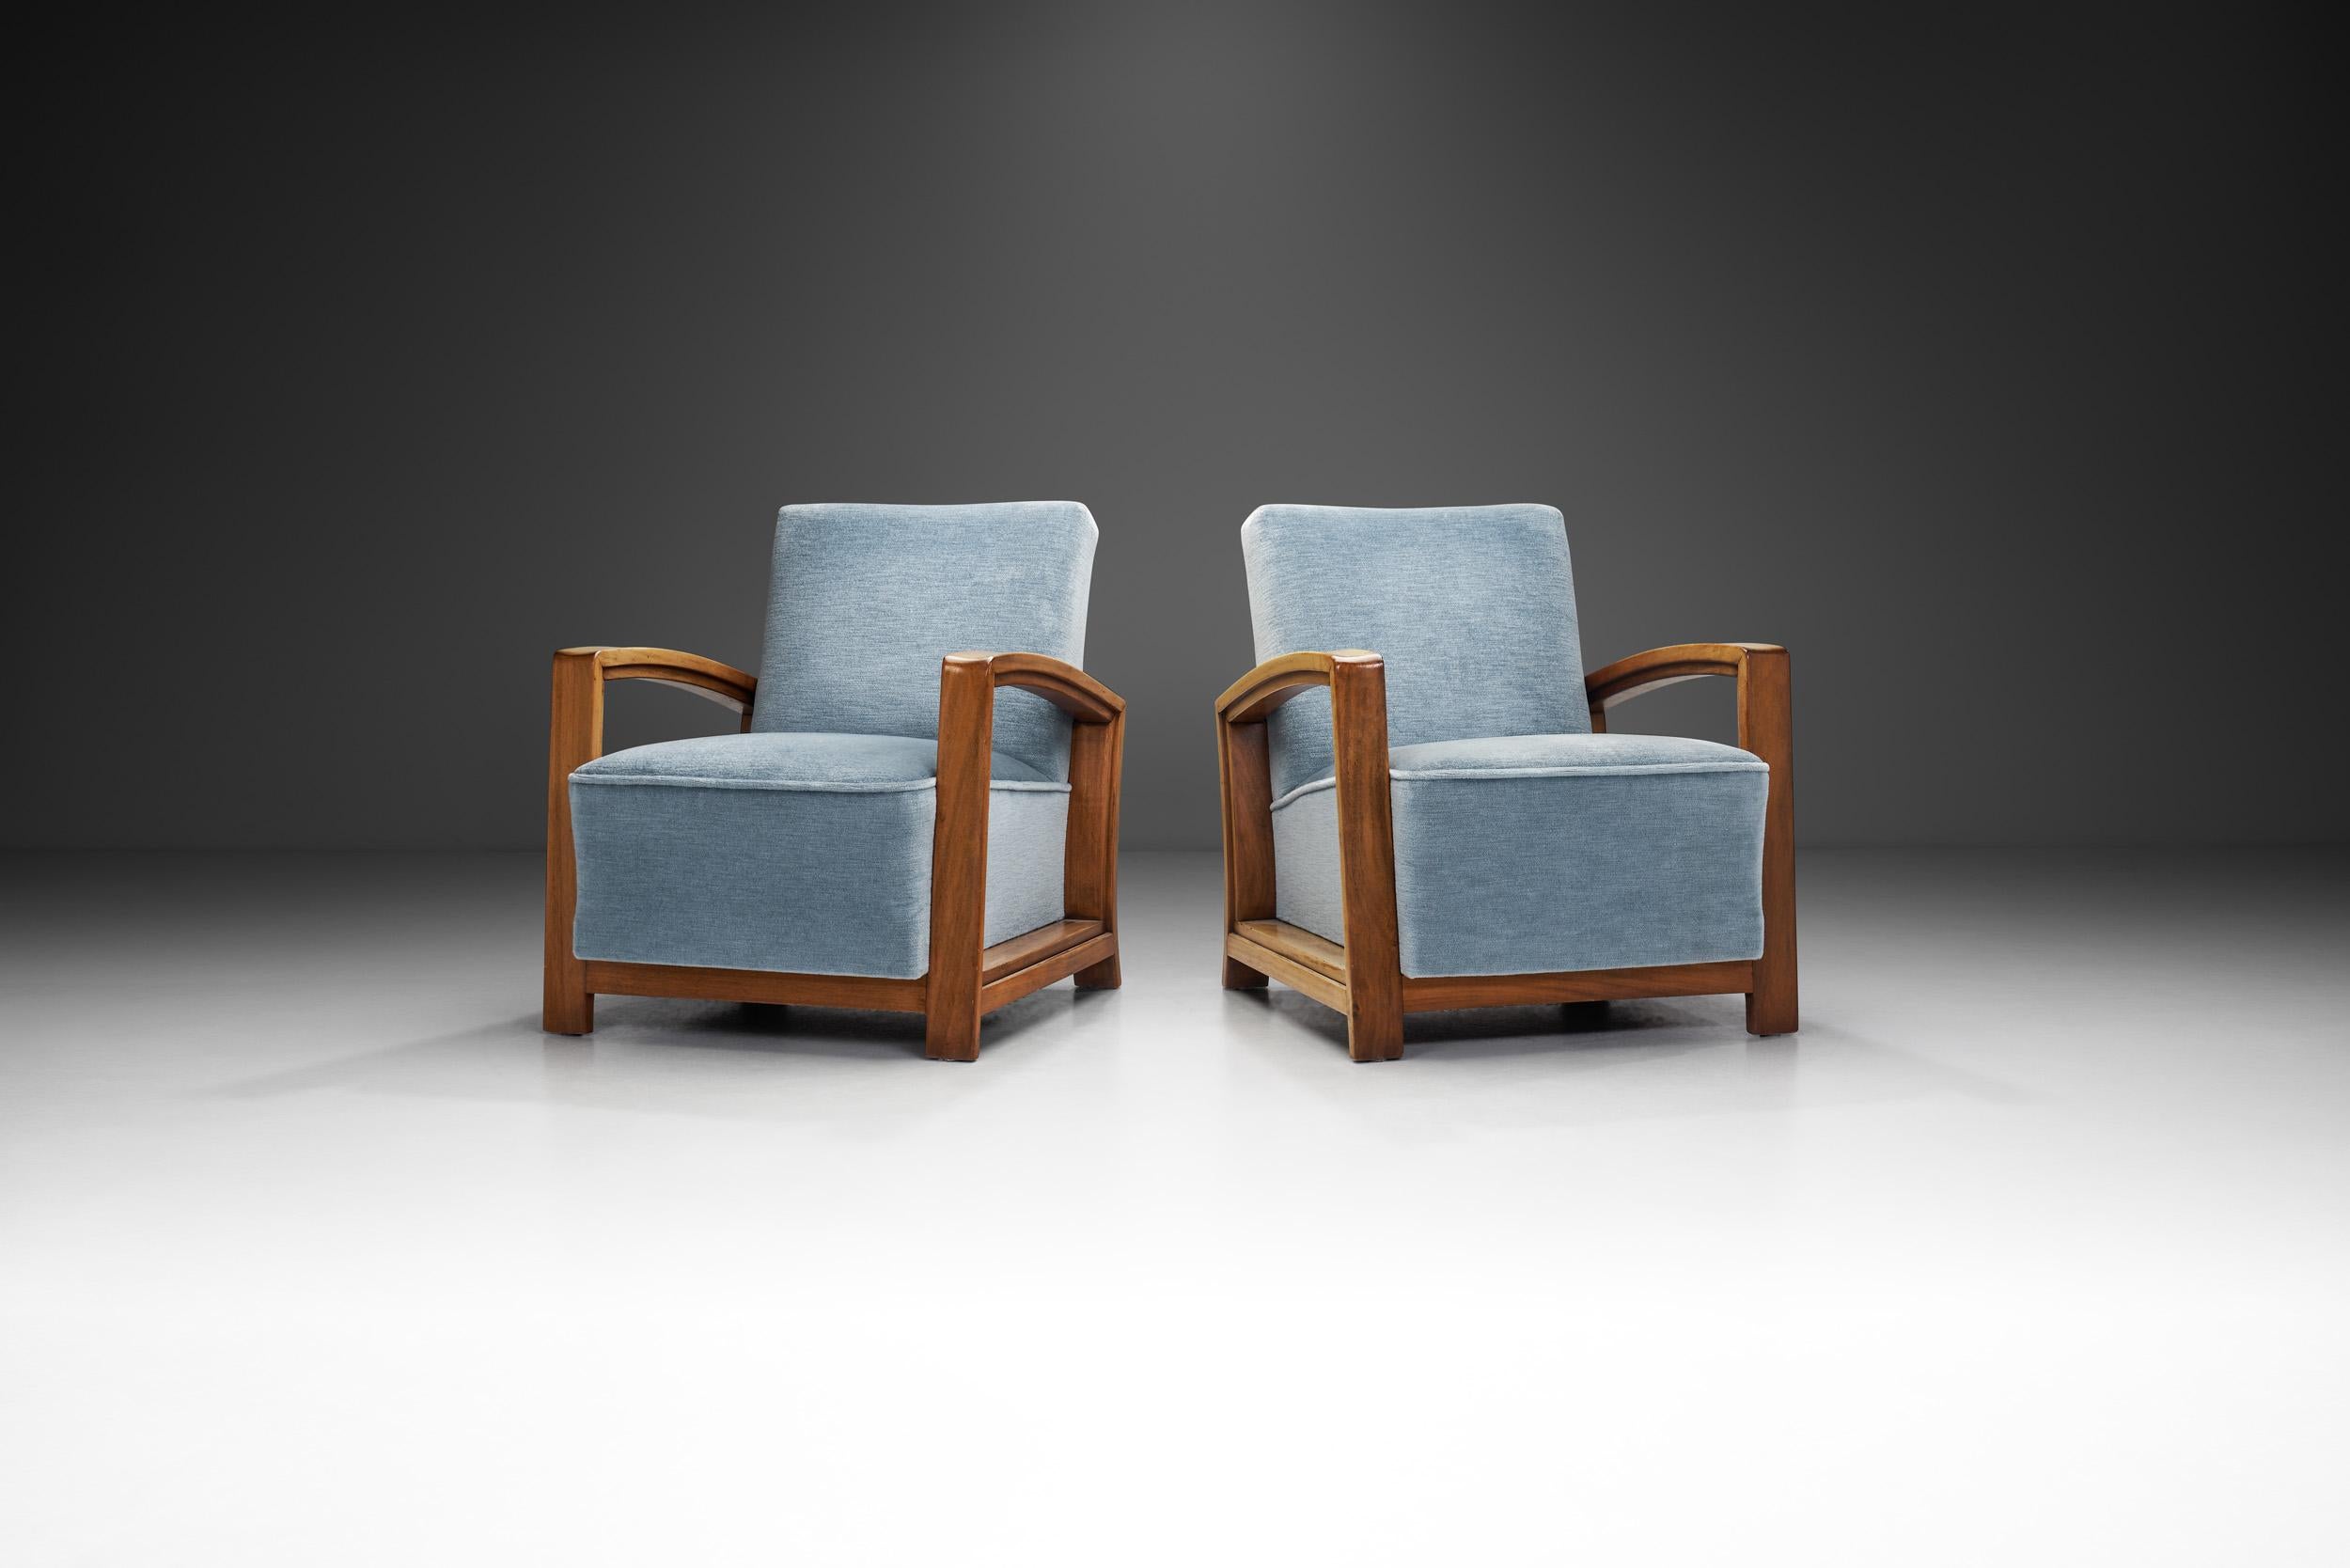 In the heart of Dutch design innovation during the 1930s emerged these exquisite embodiments of the fusion between Dutch modernism and the opulent Art Deco style. These angular armchairs, steeped in history, showcase a harmonious blend of form and